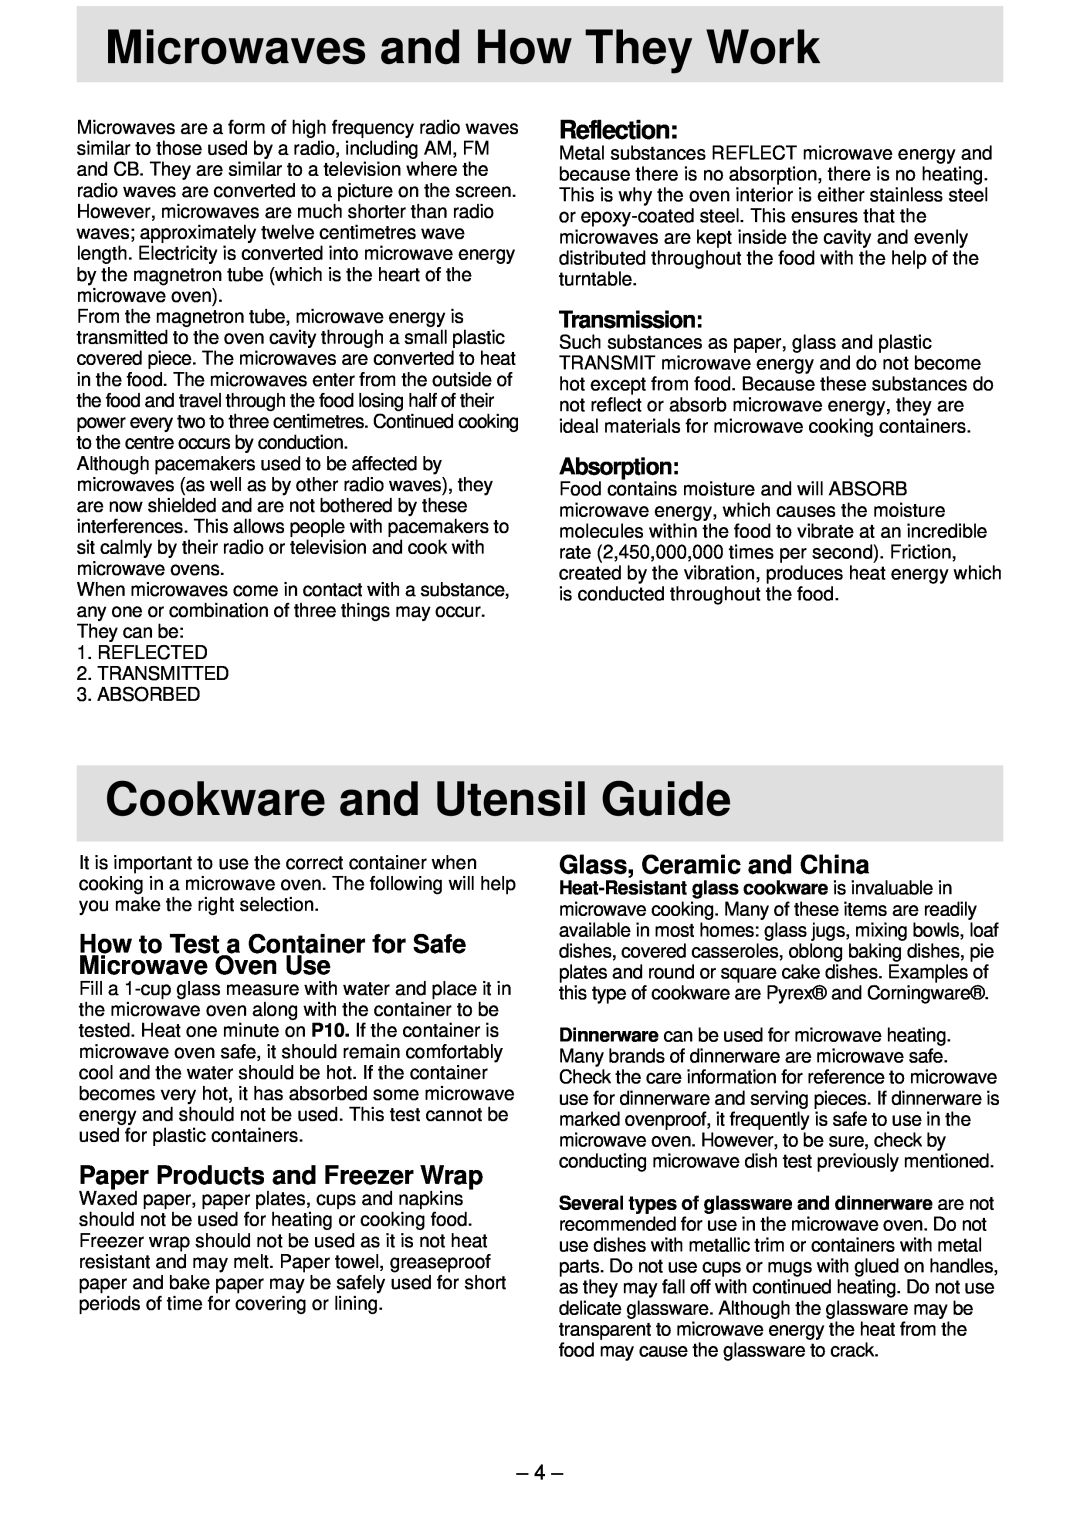 Panasonic NN-T791 Cookware and Utensil Guide, Reflection, How to Test a Container for Safe Microwave Oven Use, Absorption 